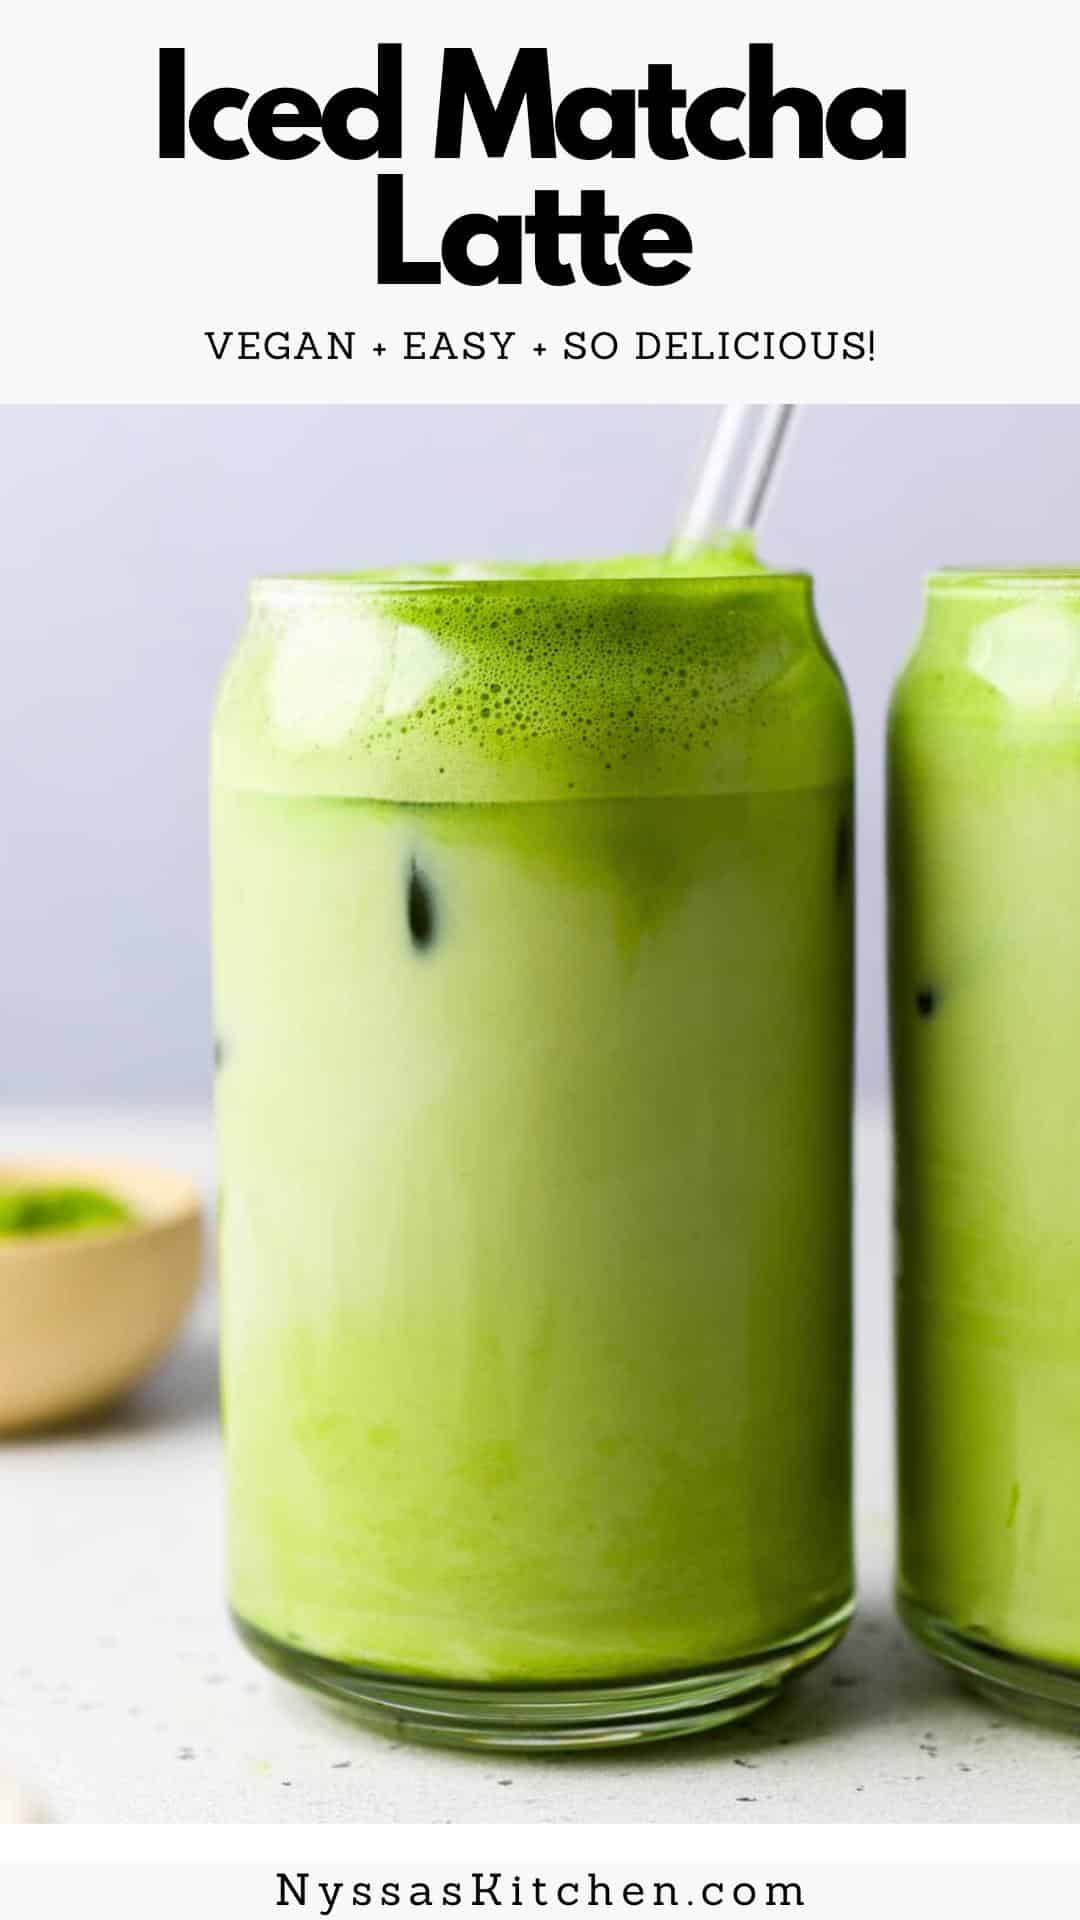 This iced matcha latte recipe is super easy to make at home! It is a simple DIY matcha that's creamy, refreshing, and better than Starbucks (truly!). Made with good for you ingredients like matcha powder, dairy free milk, vanilla, and lightly sweetened to taste. Vegan, dairy free, paleo friendly, Whole30 option.